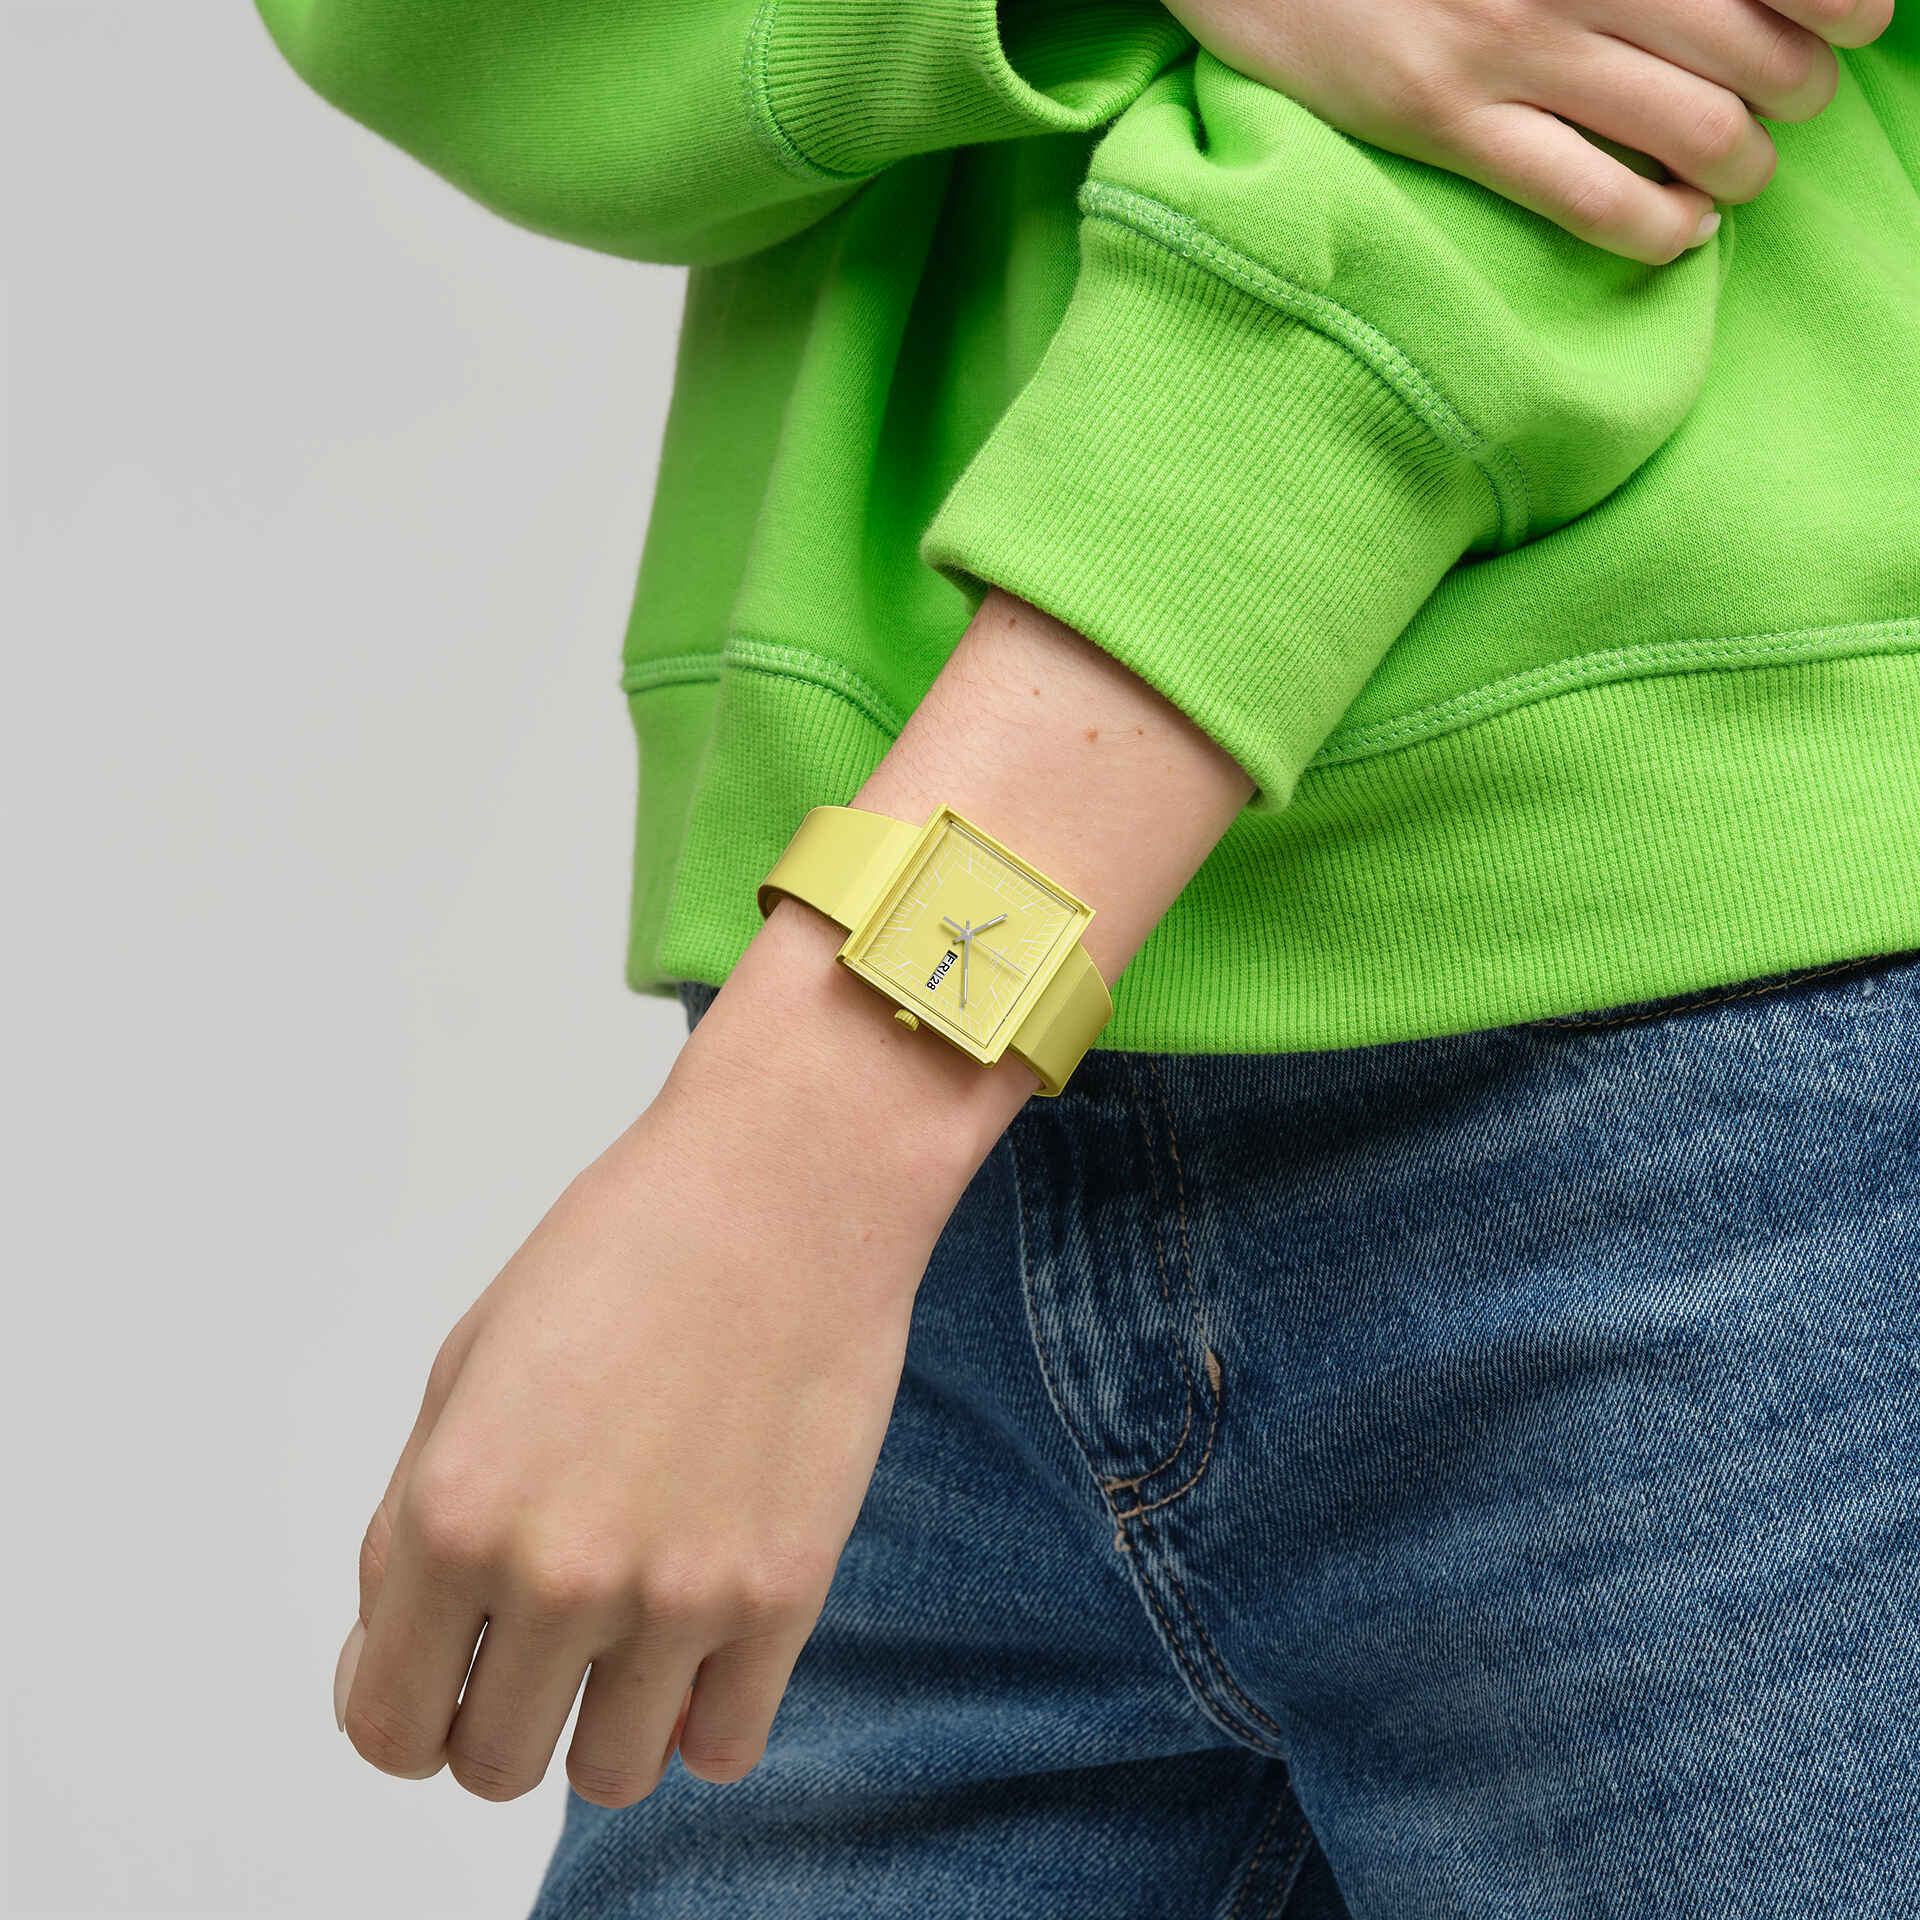 Swatch Watch What If…Lemon? 42mm